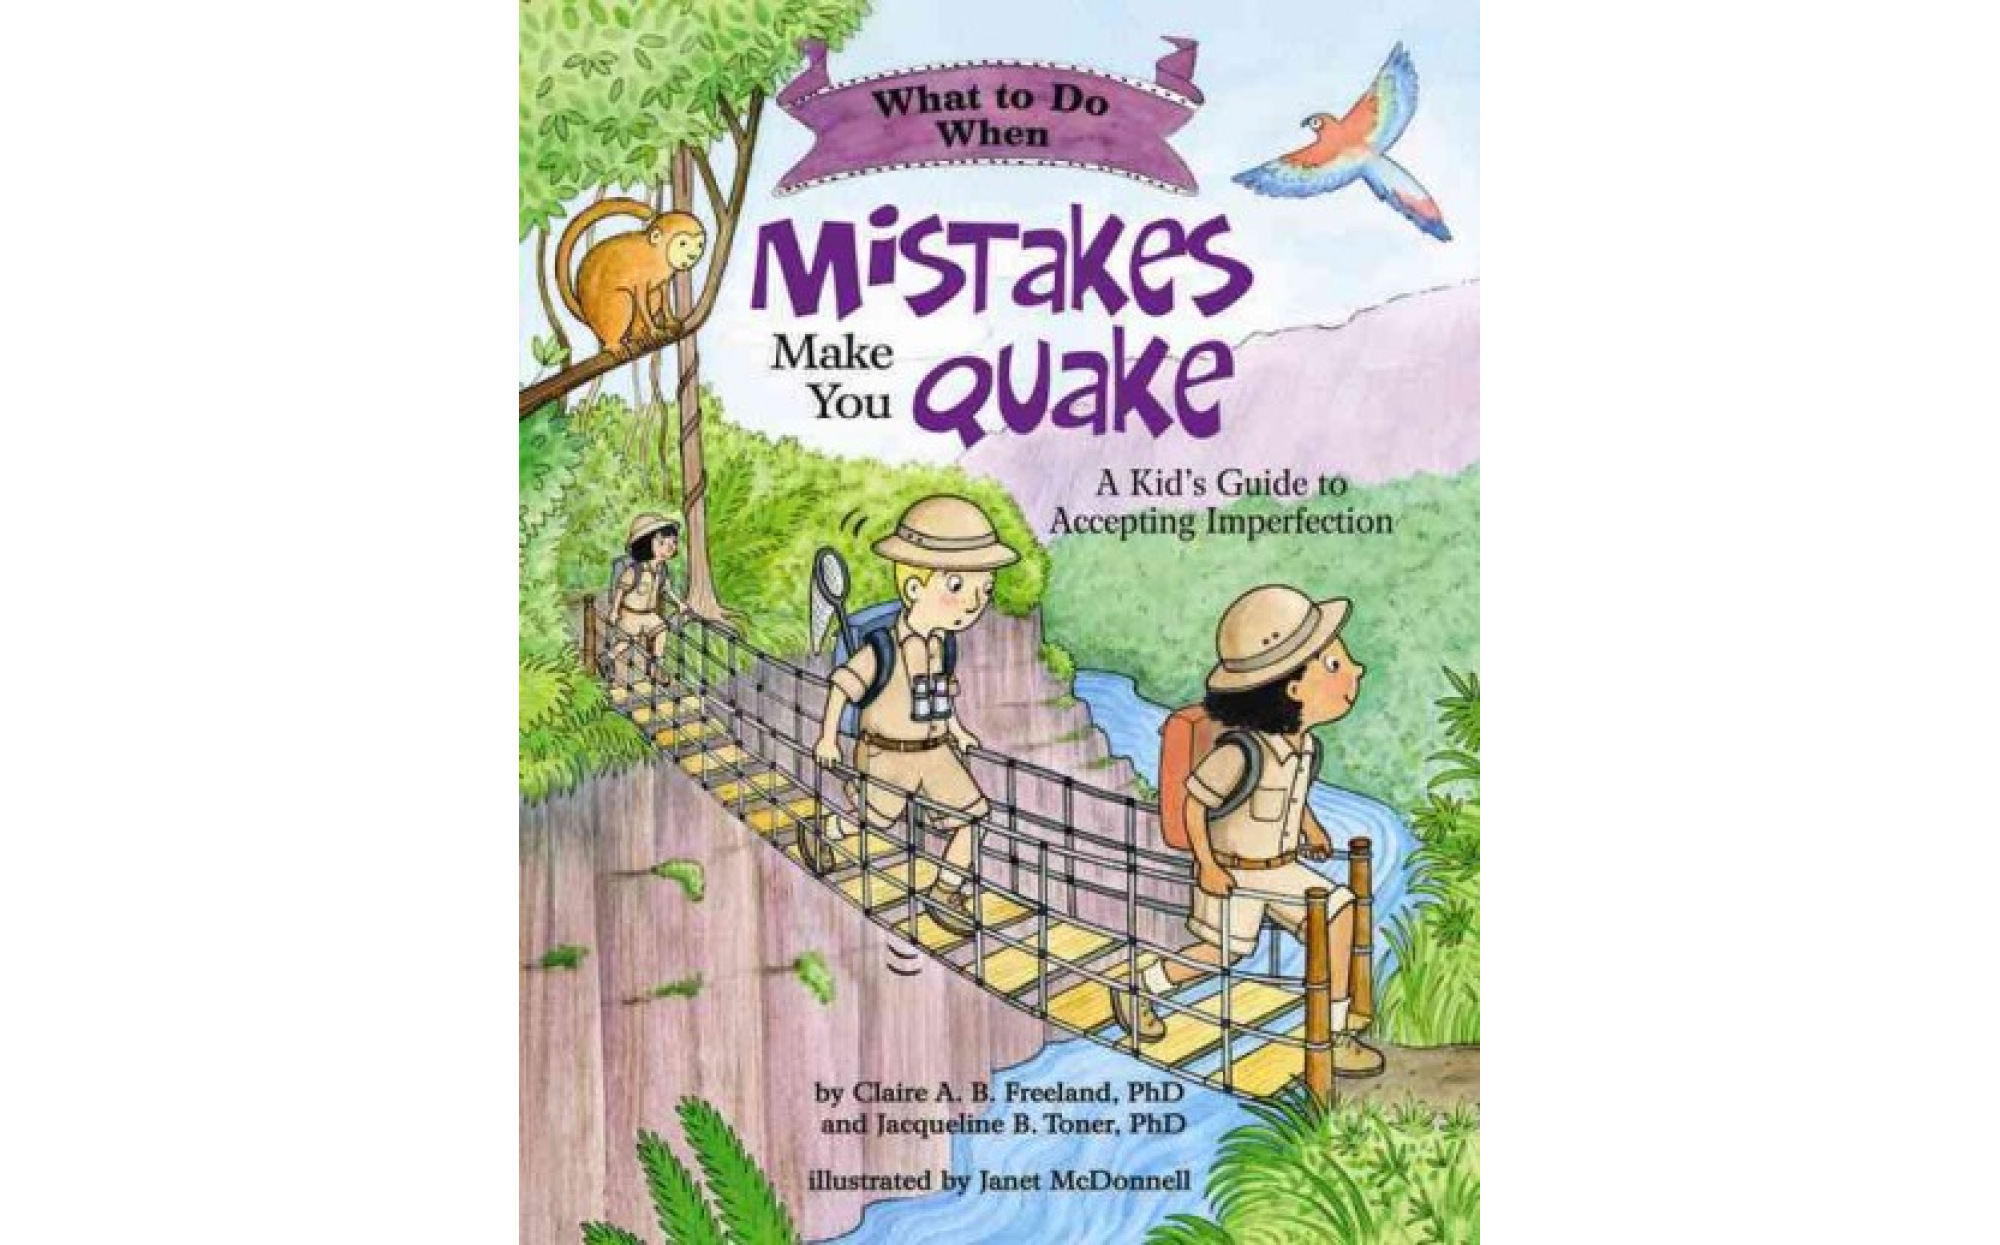 Do　Accepting　What　to　Mistakes　You　Guide　Books　Make　to　A　Quake:　Imperfection　–　When　Kid's